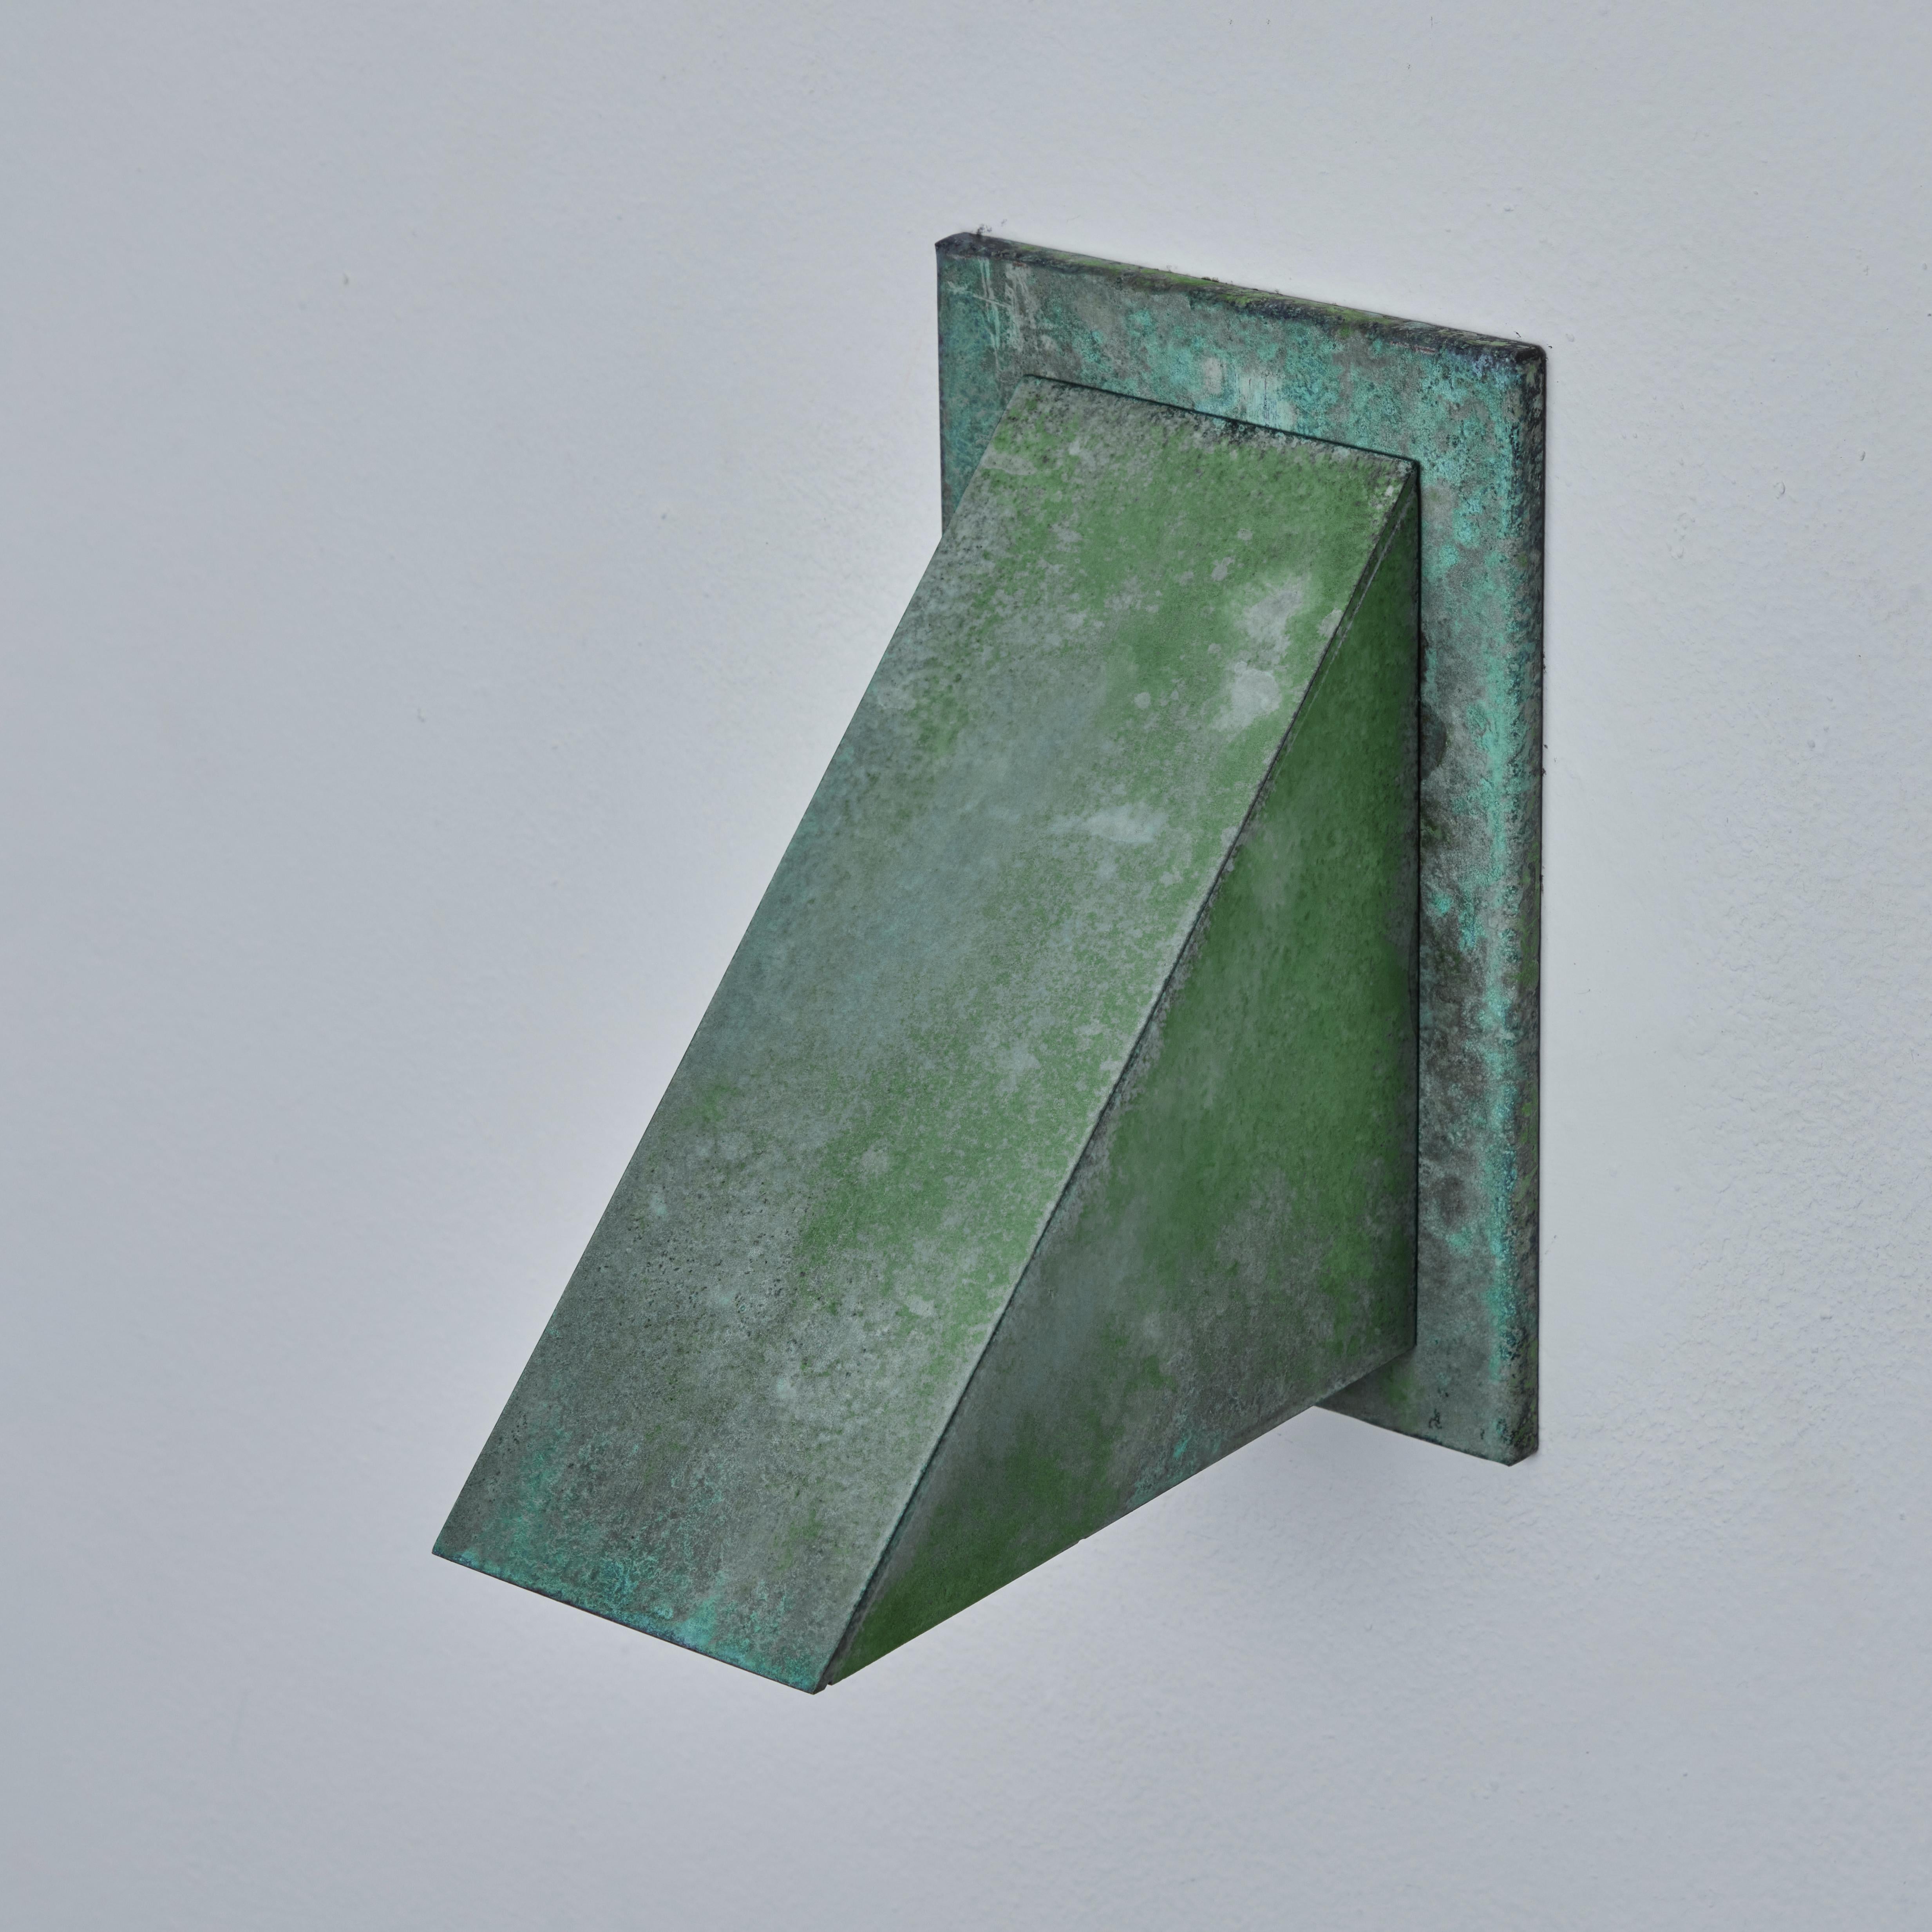 Jonas Bohlin 'Oxid' Verdigris Patinated Outdoor Wall Light for Örsjö. Executed in rich verdigris patinated metal with an opaline glass diffuser. An incredibly refined and clean geometric design that is quintessentially Scandinavian. For indoor or